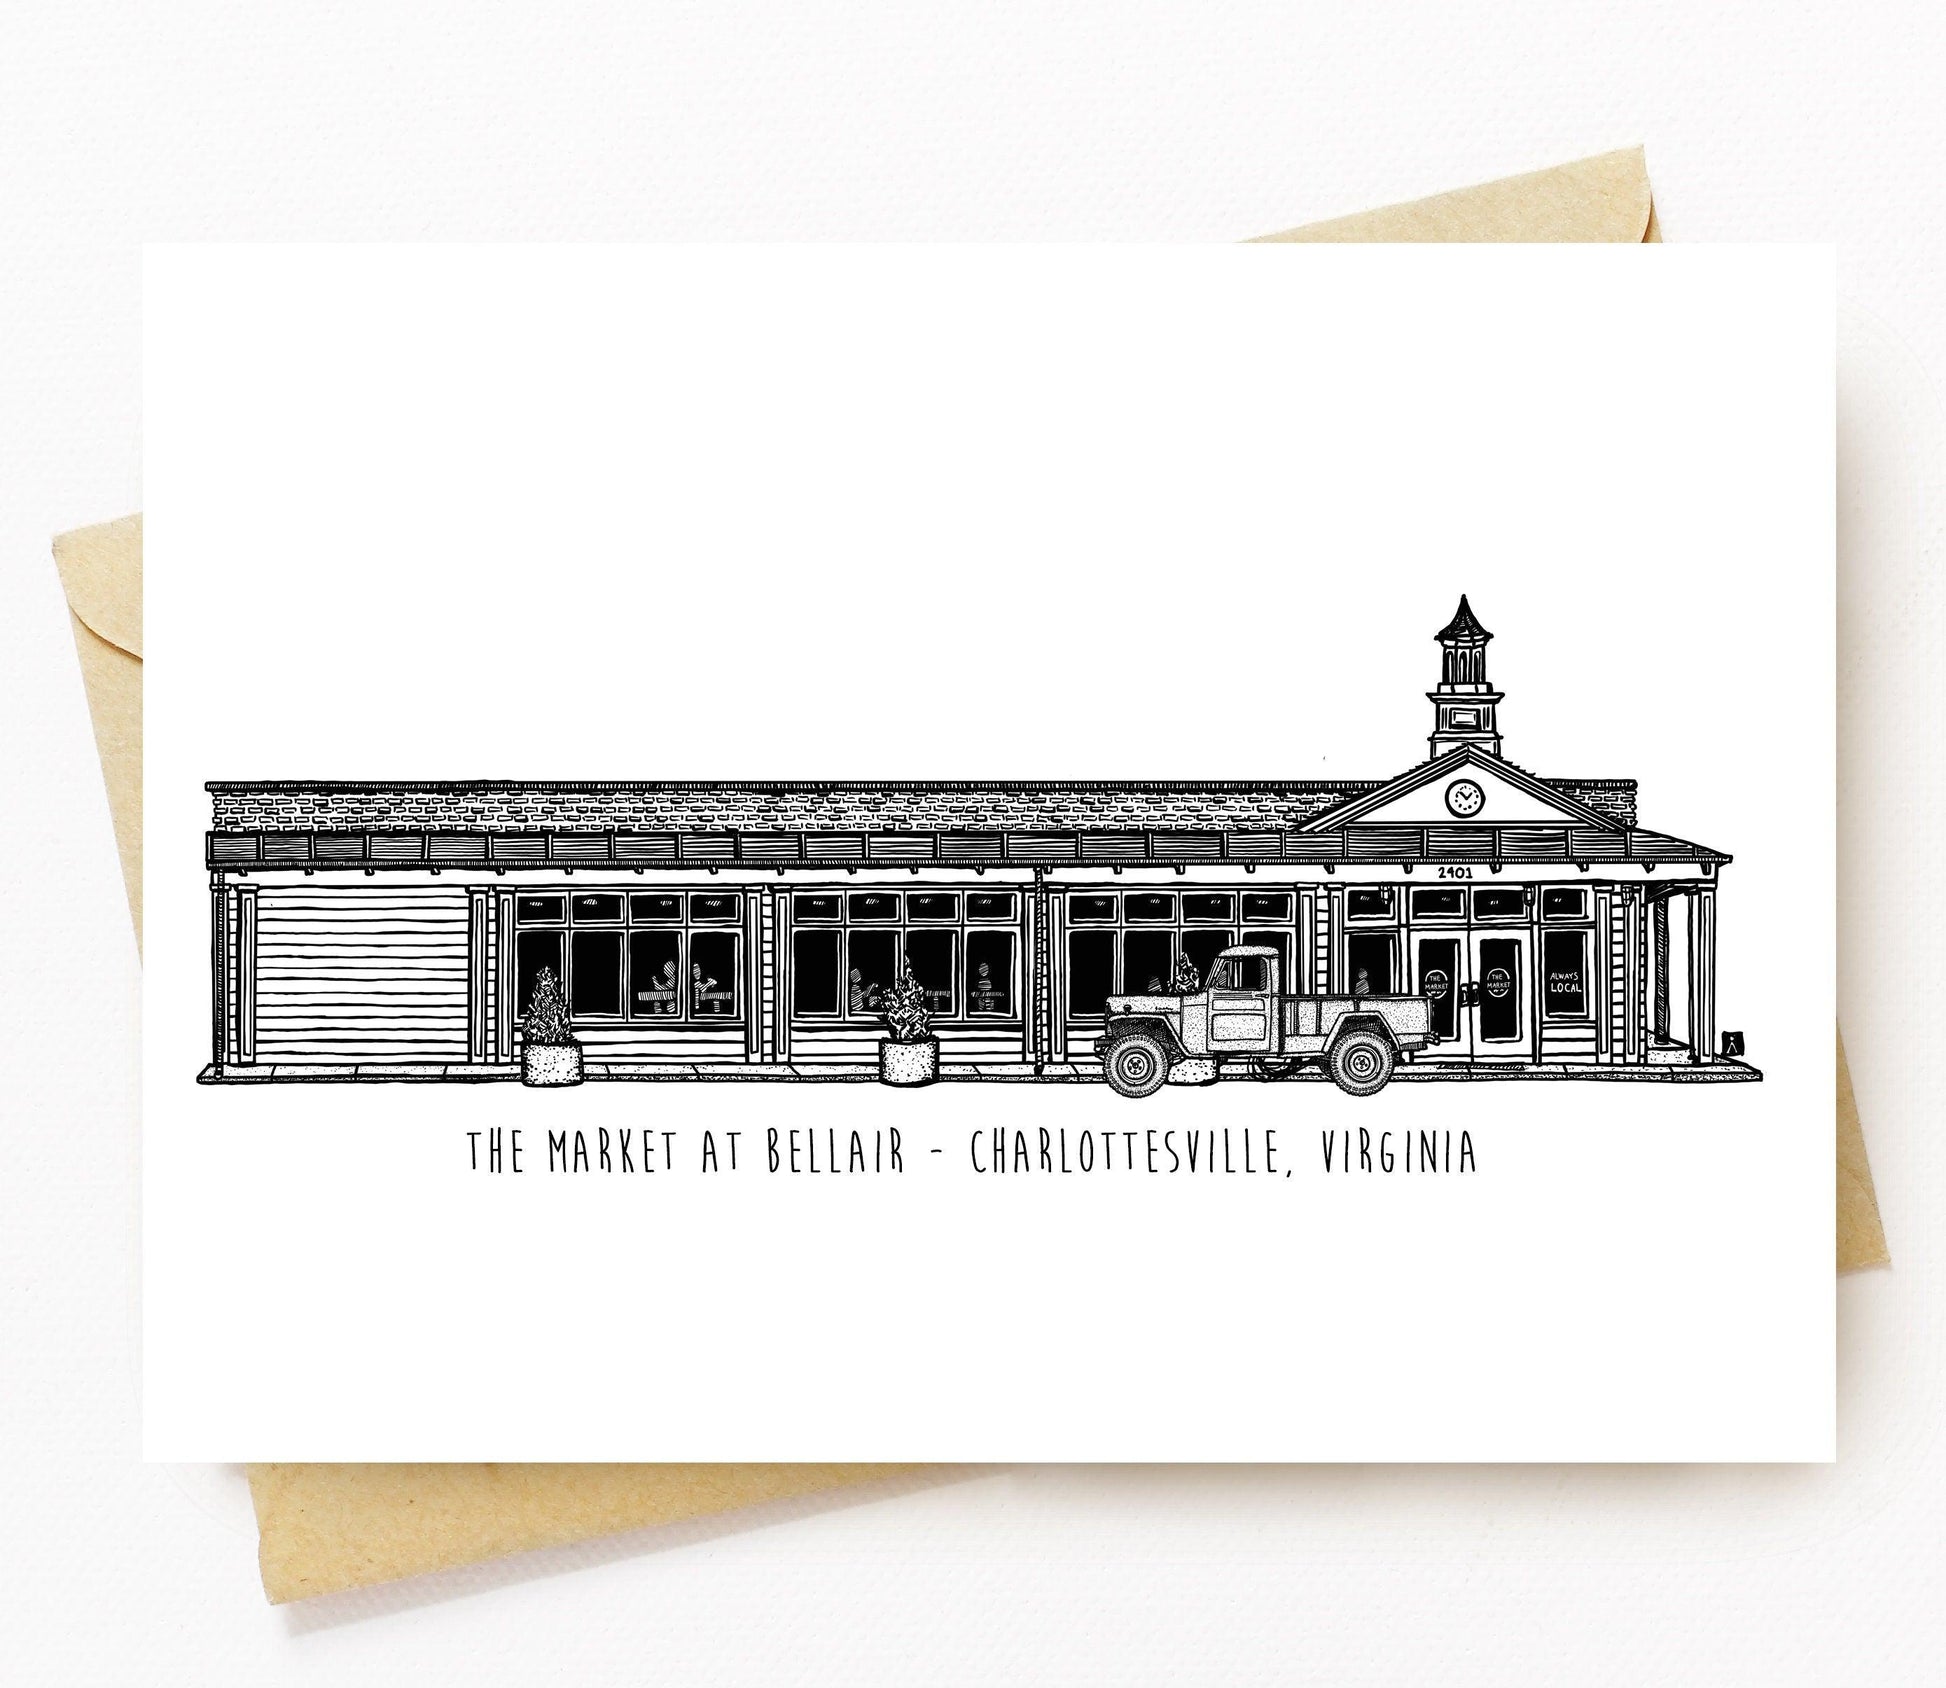 BellavanceInk: Greeting Card With A Pen & Ink Drawing Of The Market At Bellair In Charlottesville 5 x 7 Inches - BellavanceInk